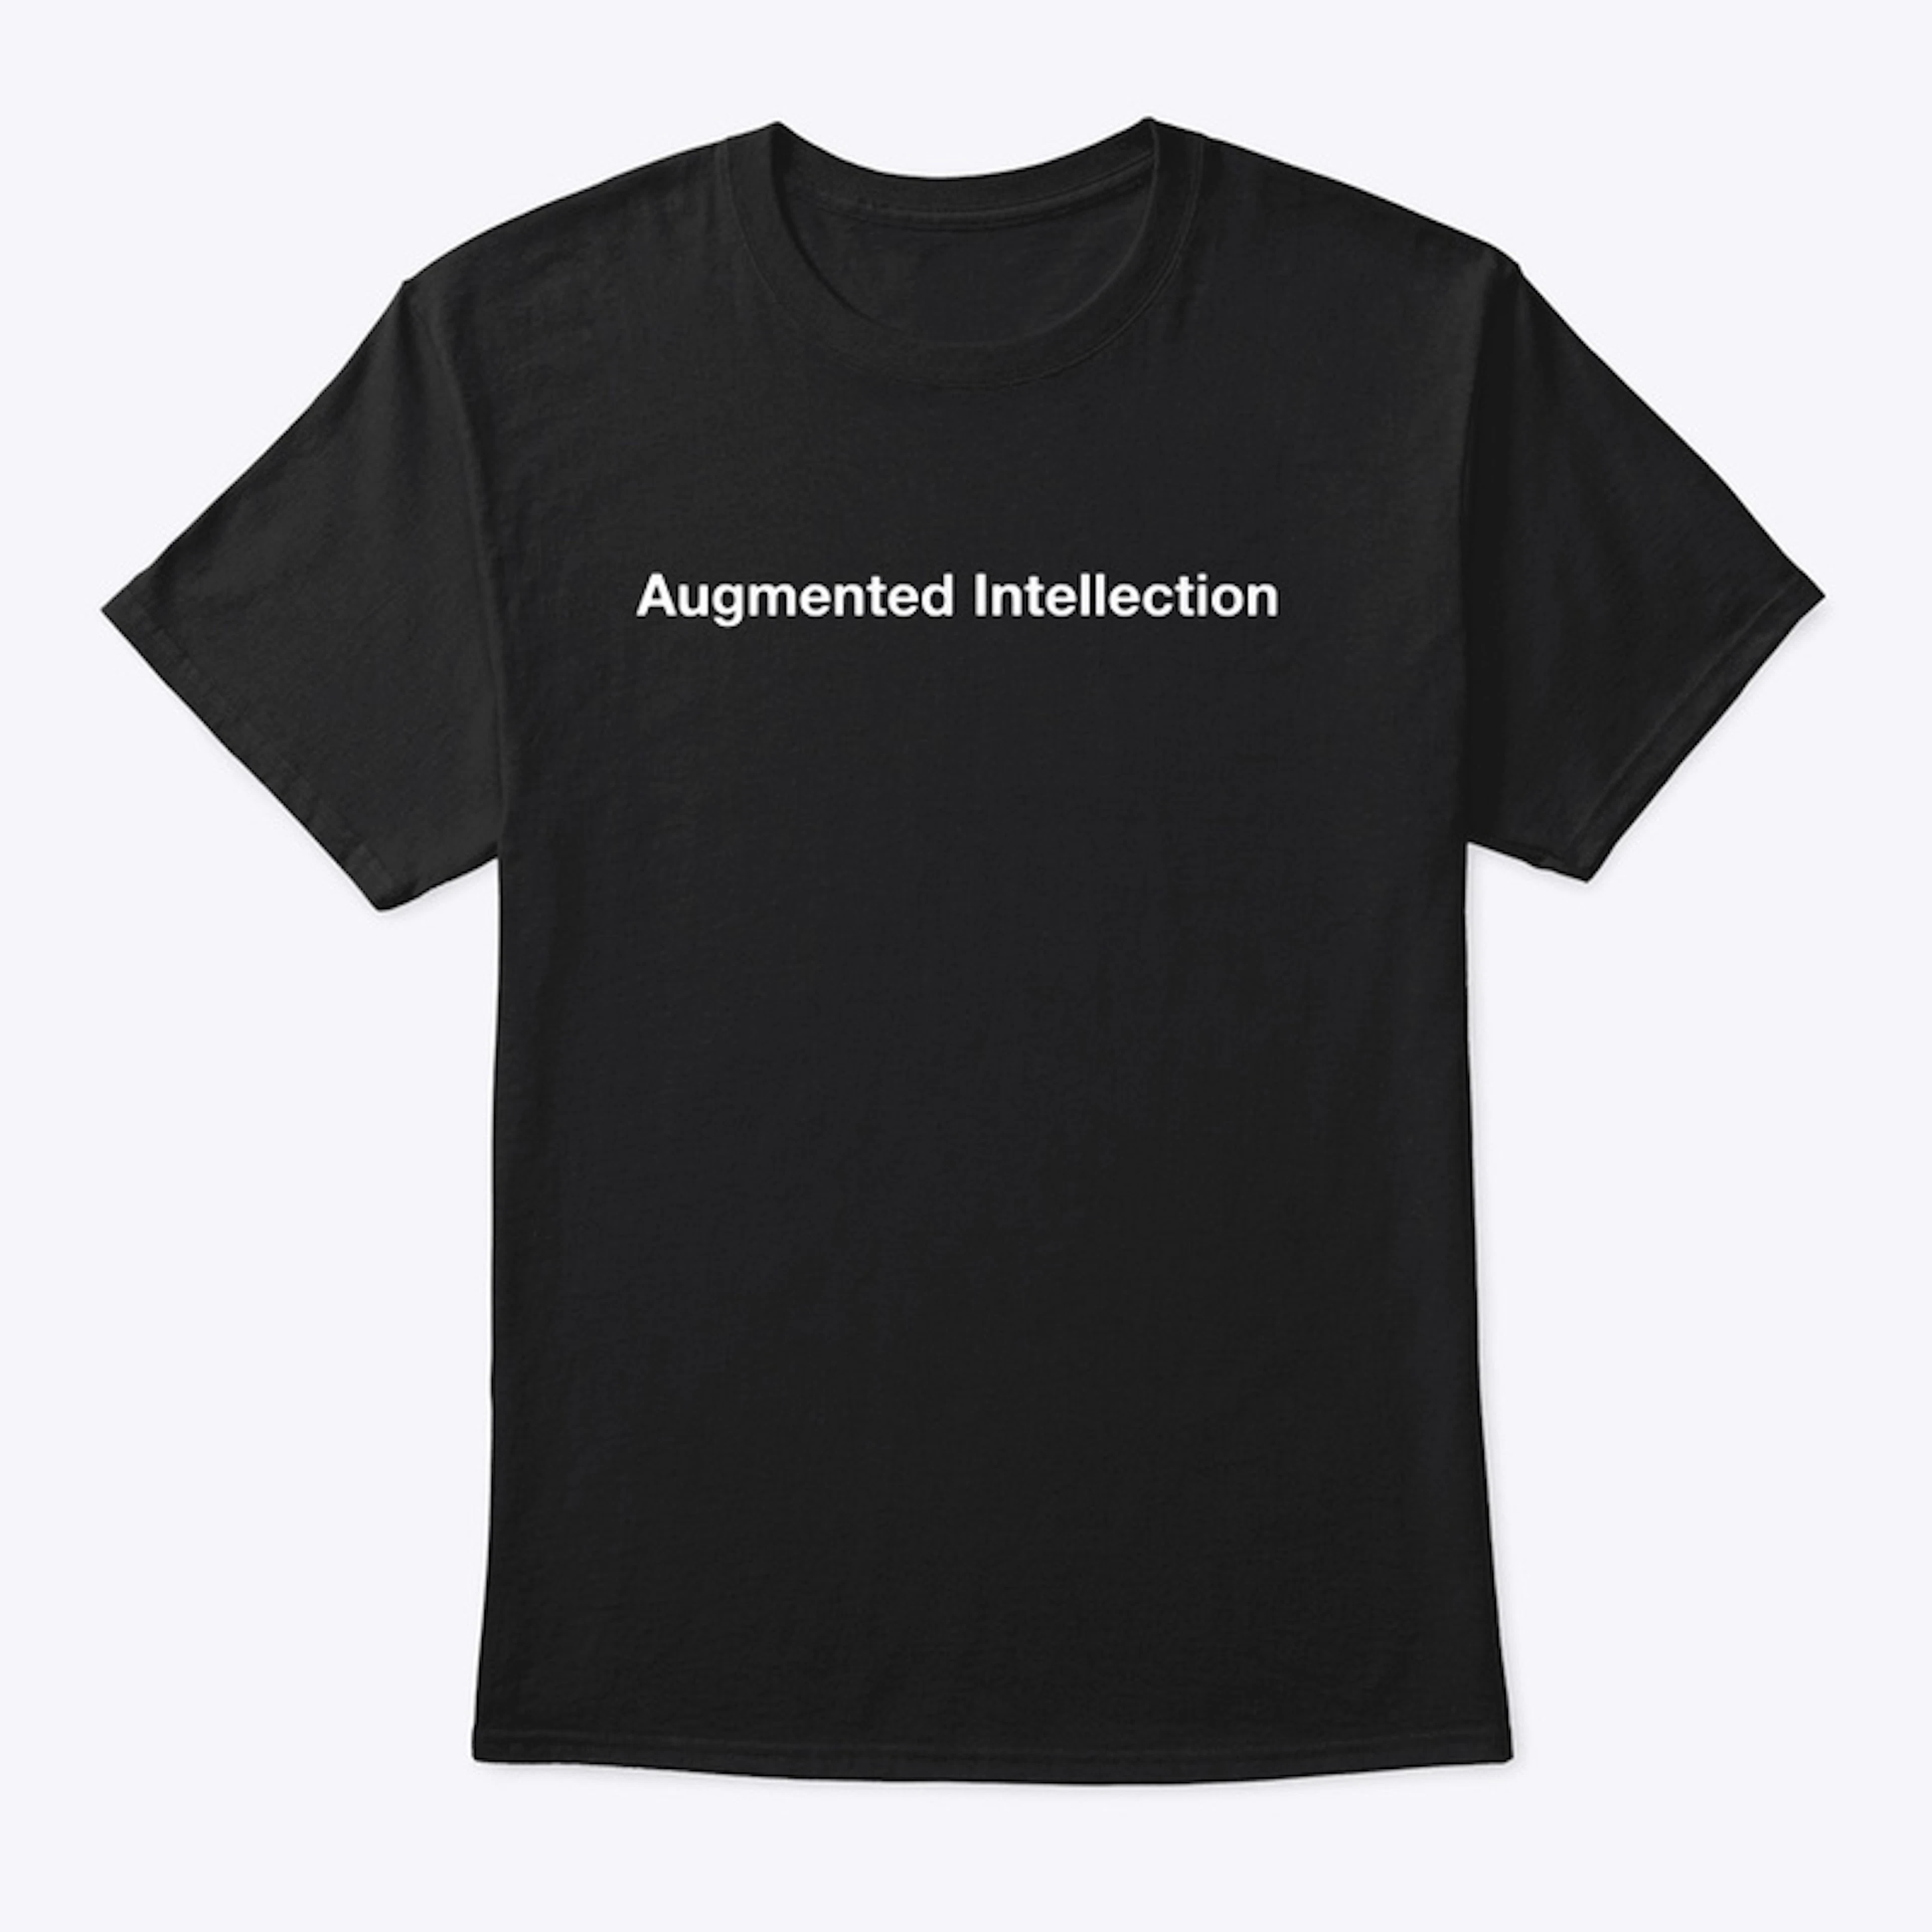 Augmented Intellection